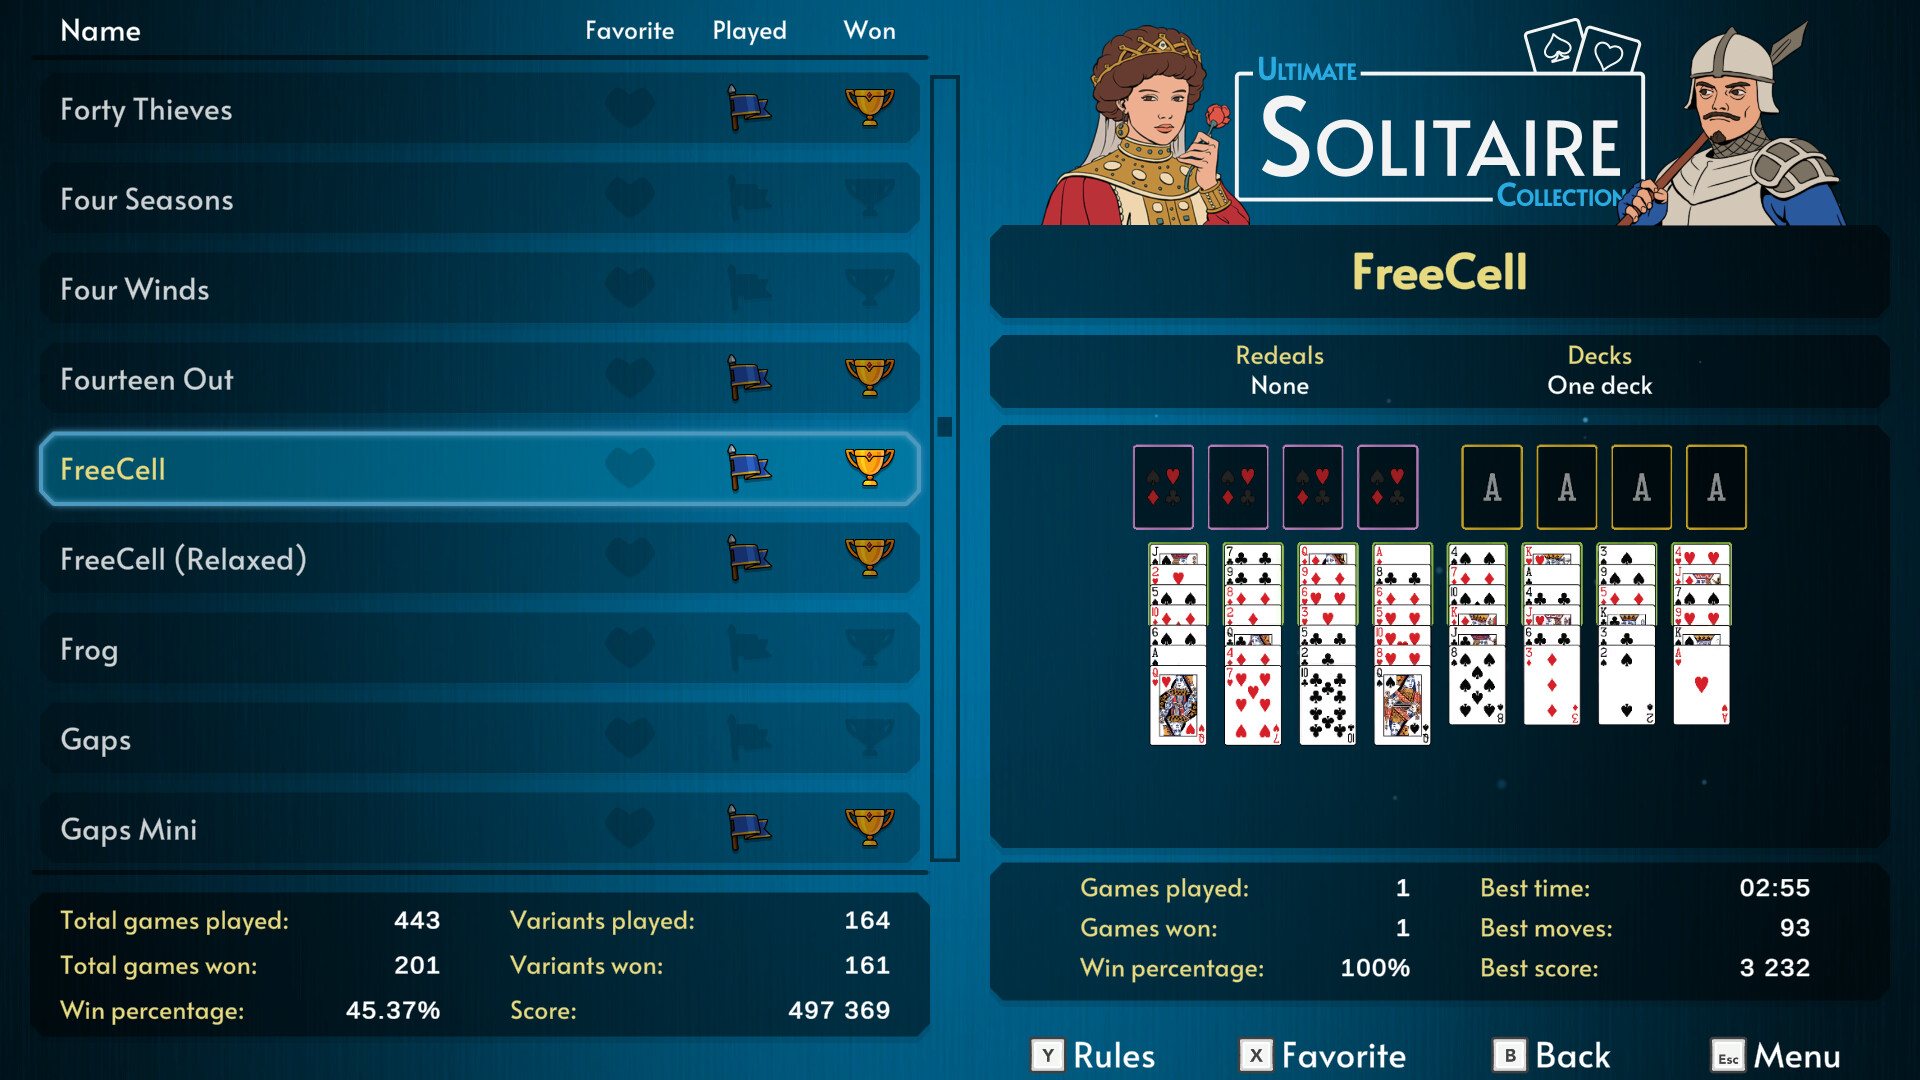 Ultimate Solitaire Collection Steam Charts & Stats